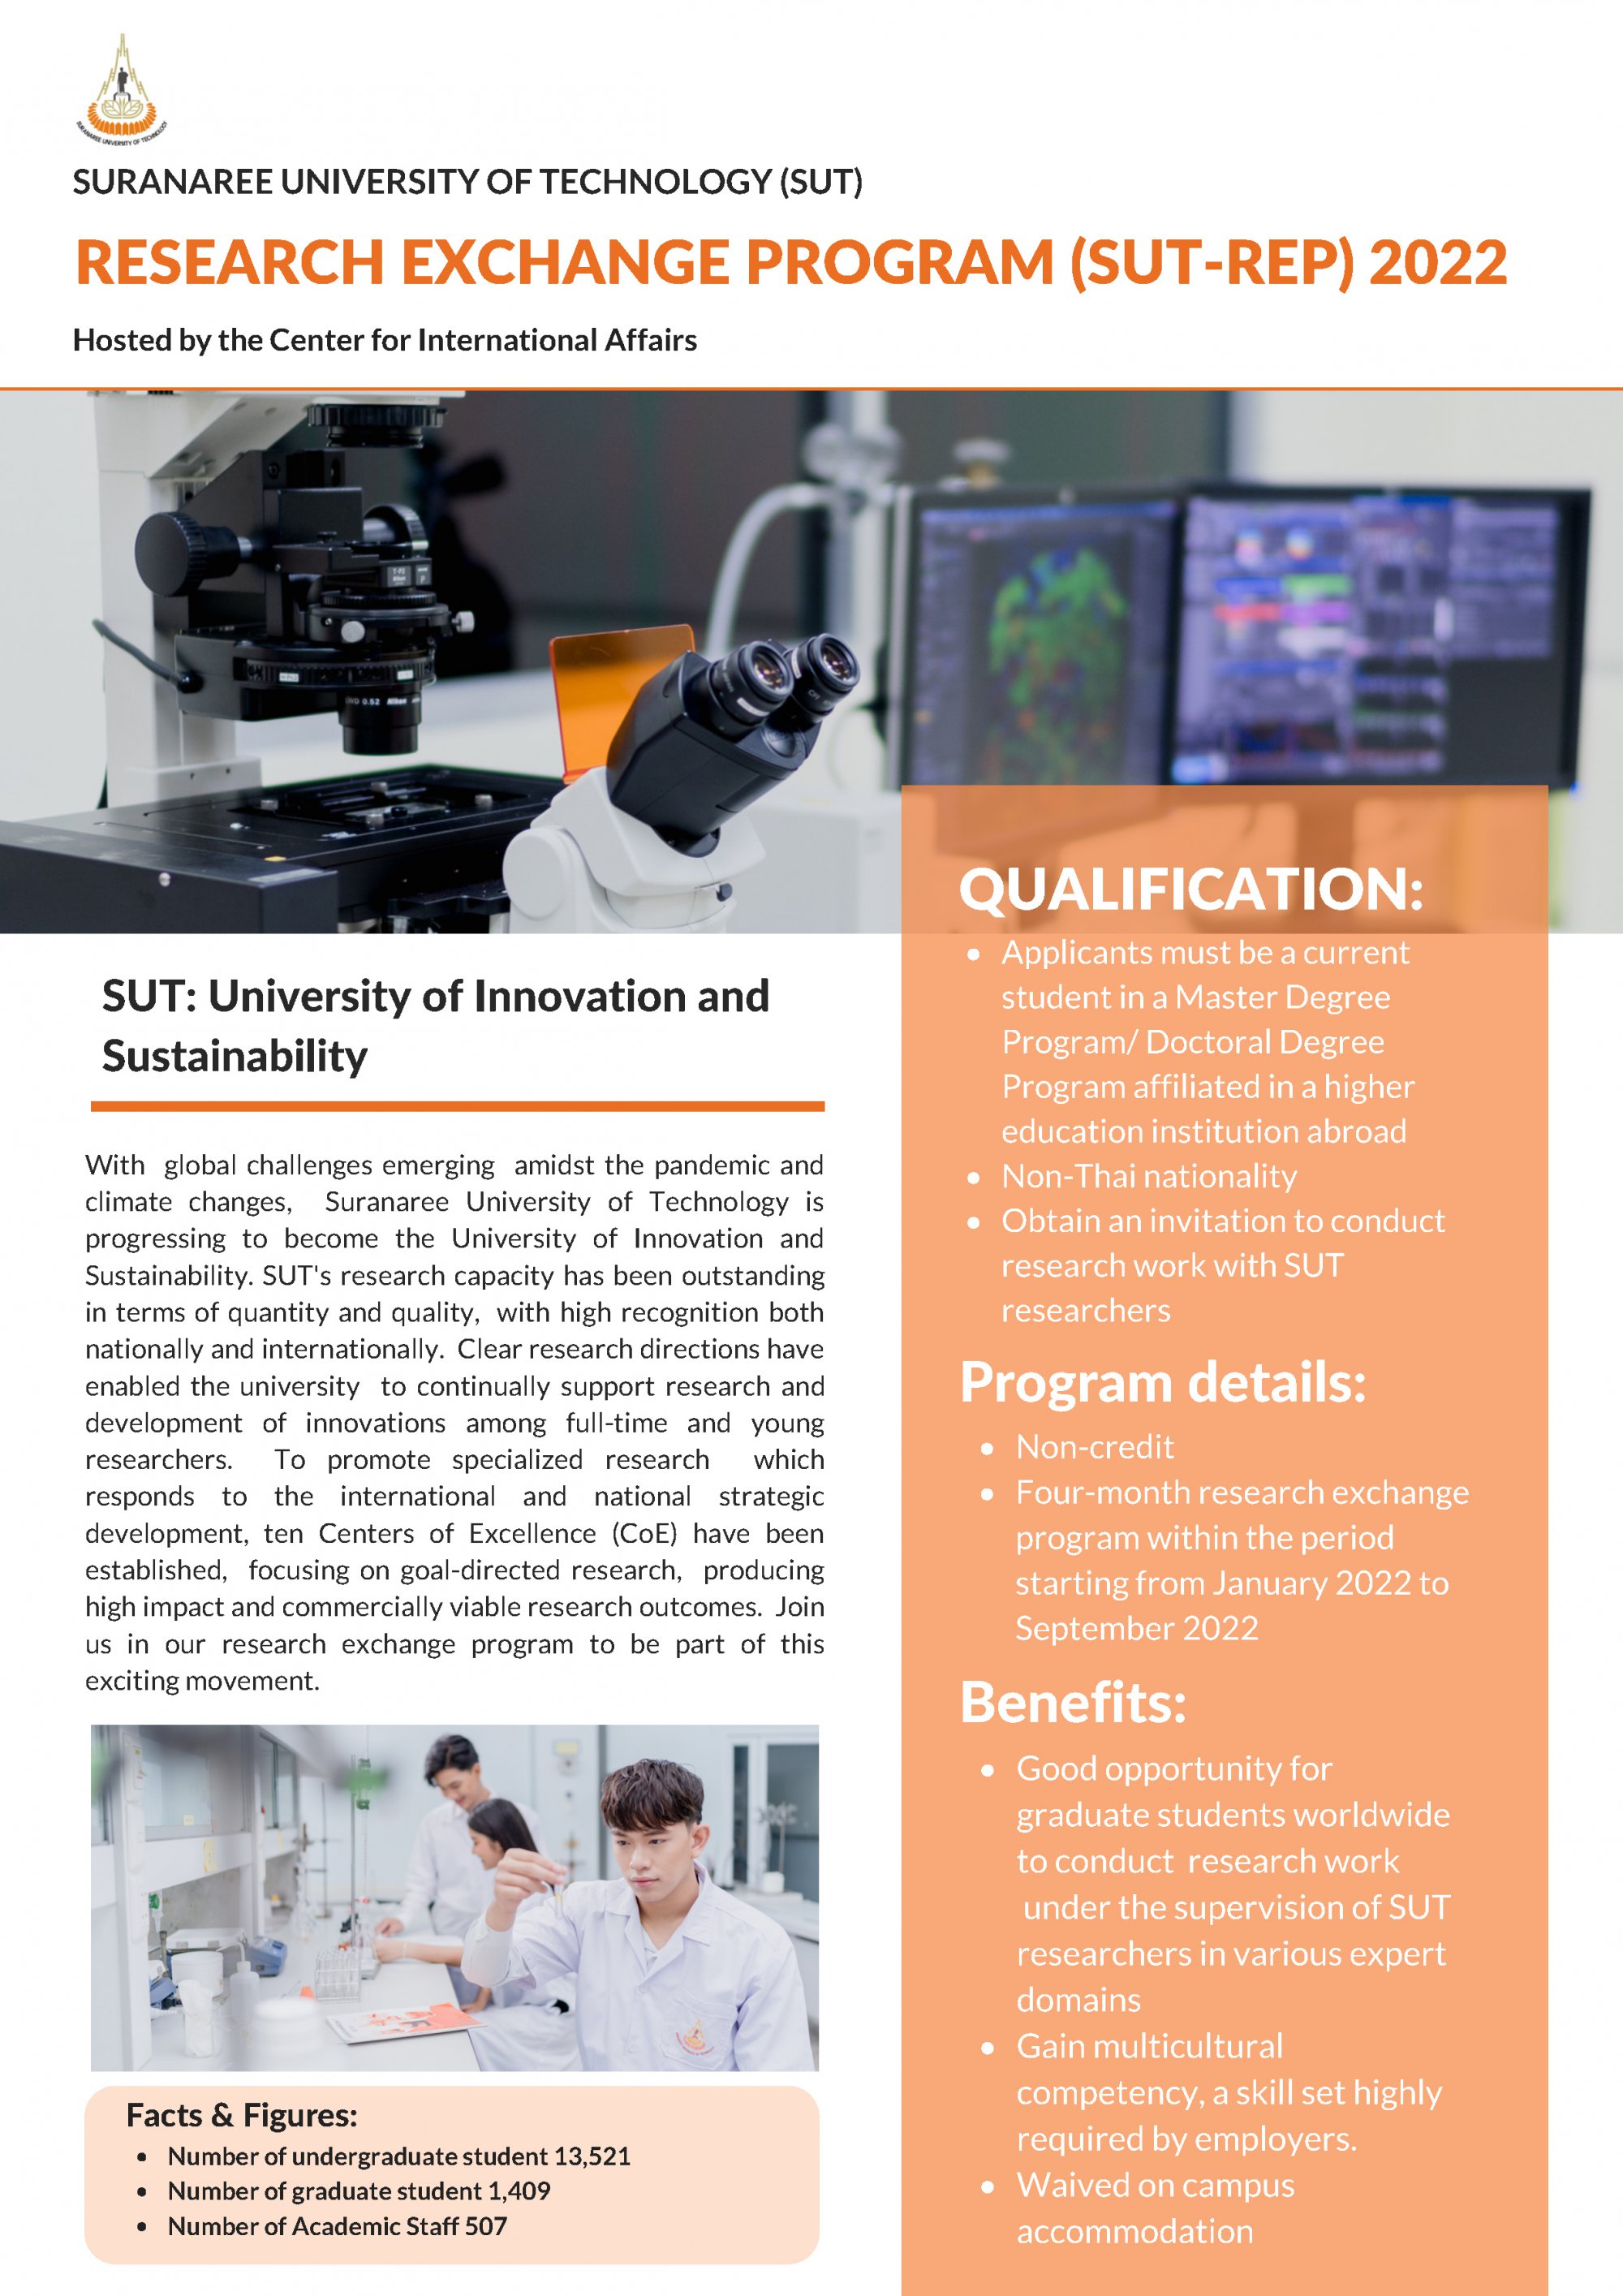 SUT_Research_Exchange_Program_2022_Page1